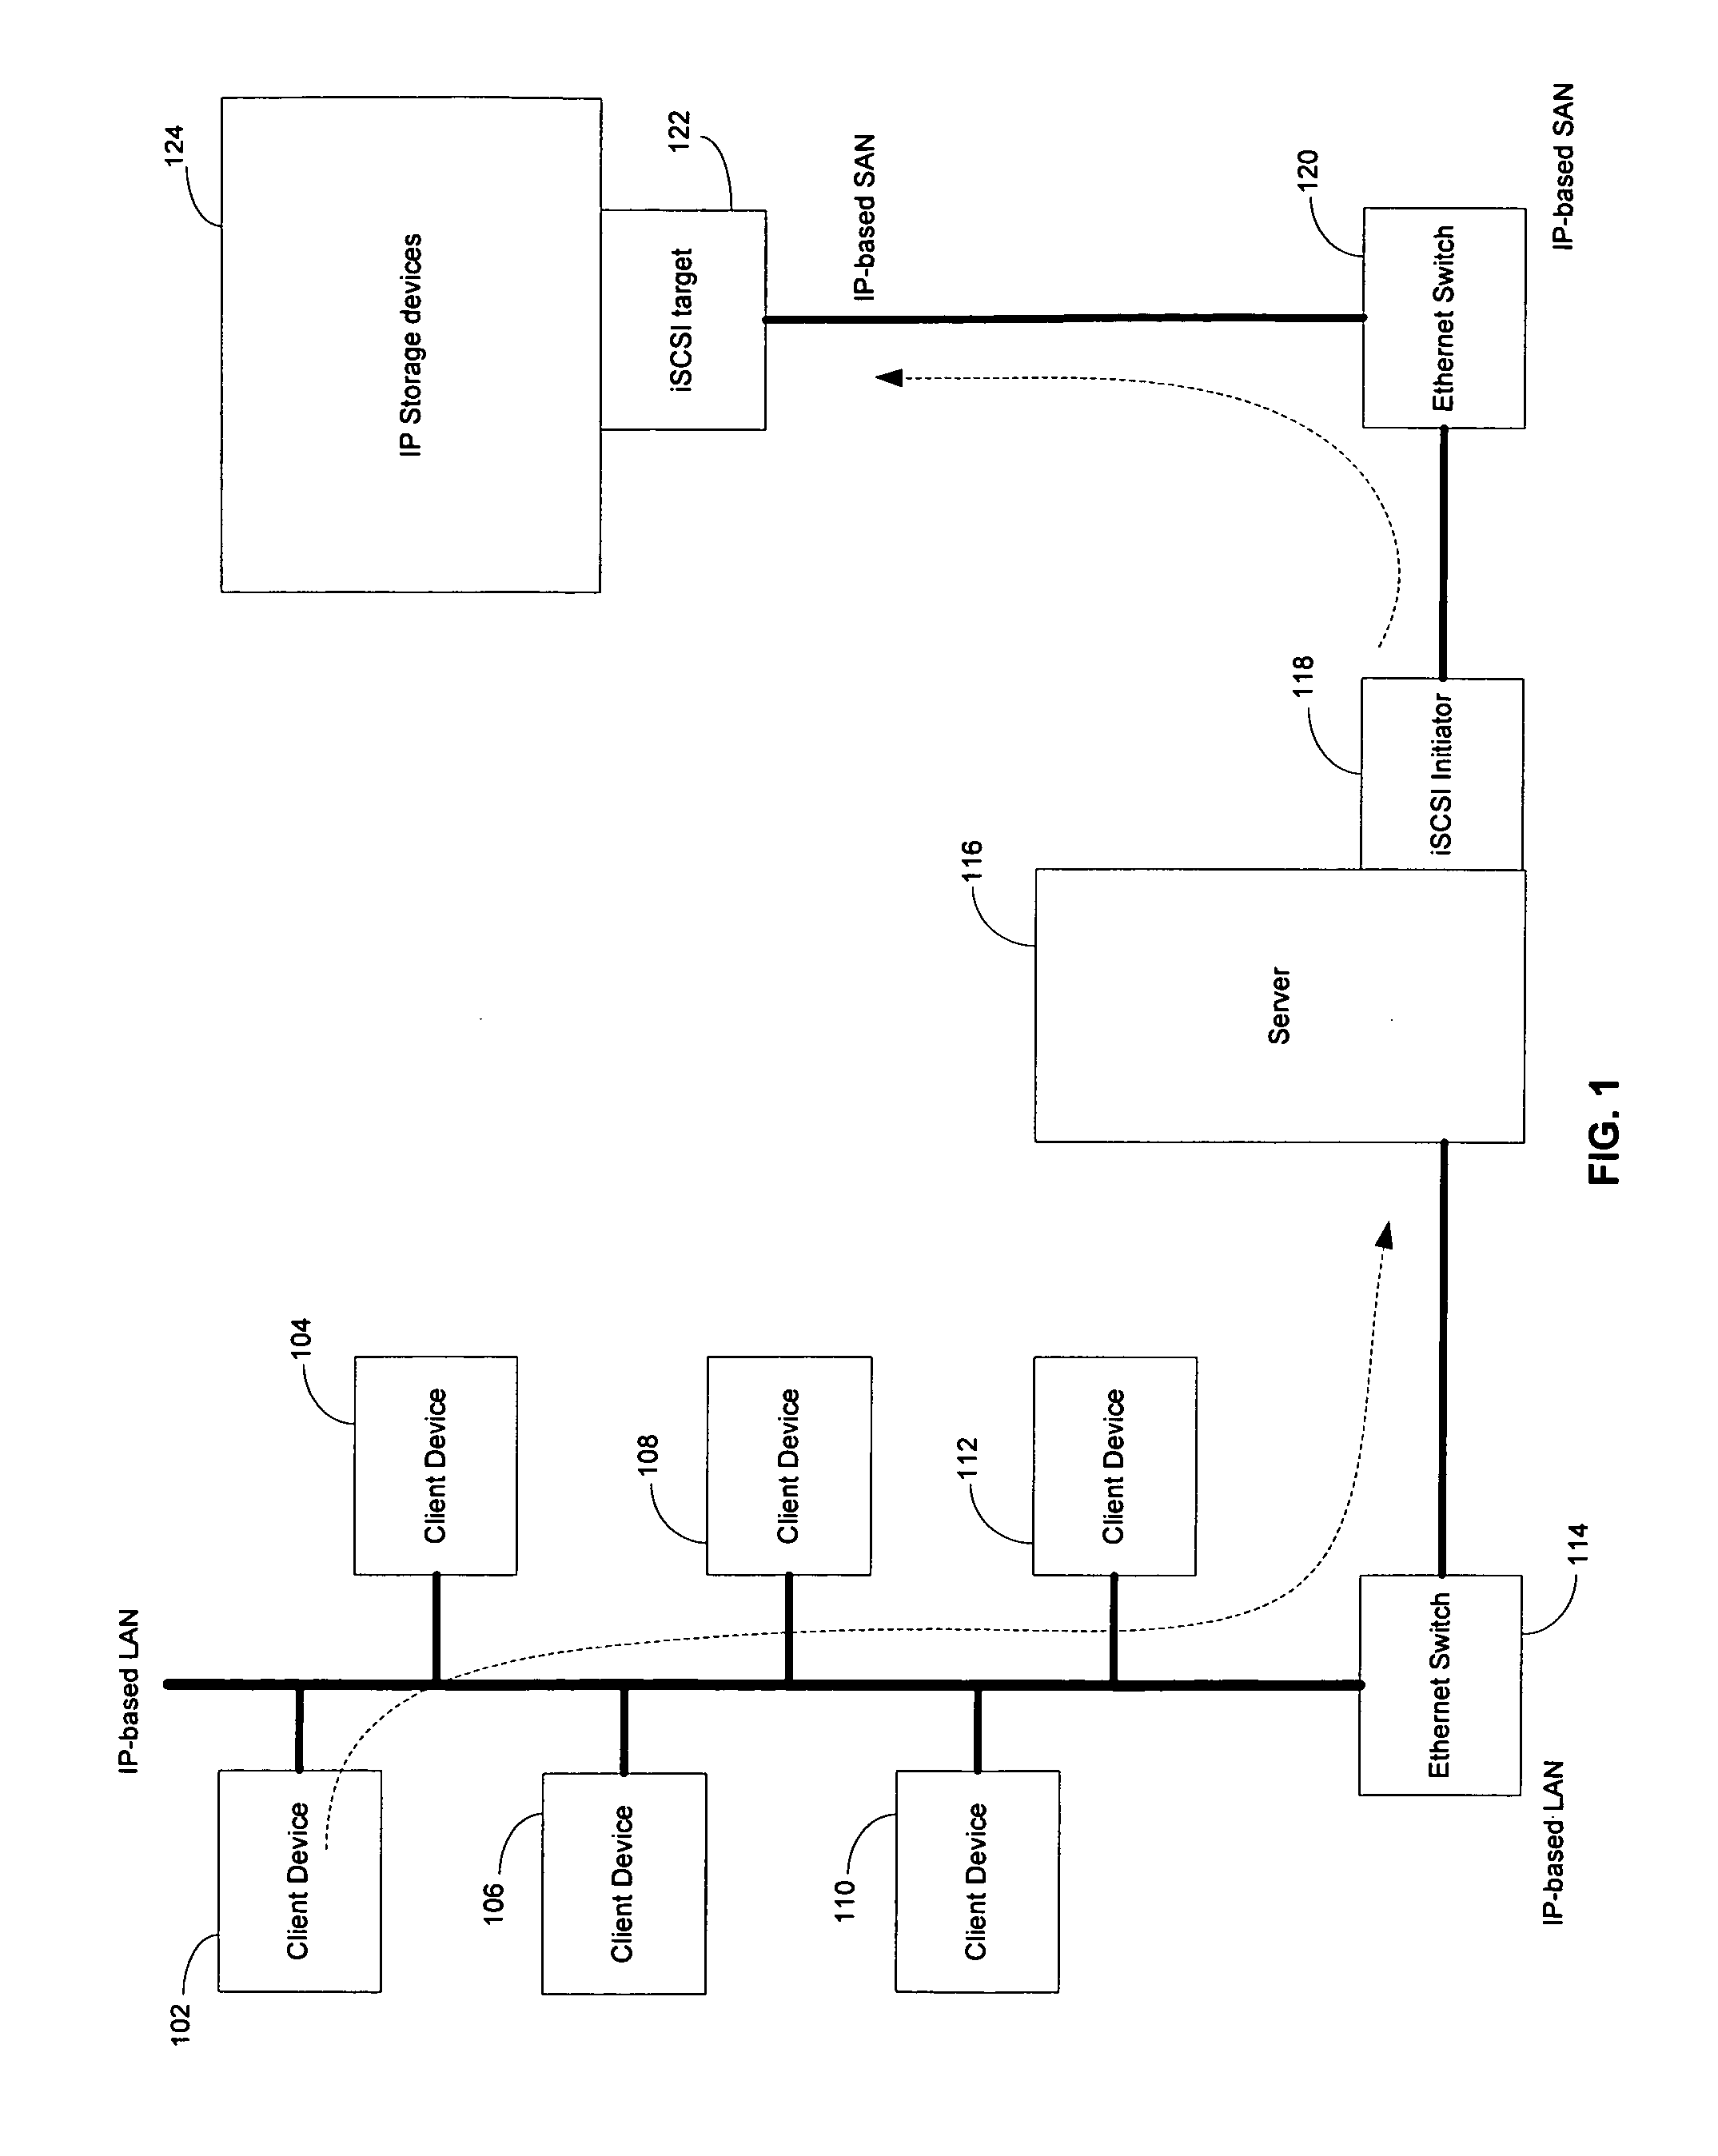 Method and system for supporting read operations for iSCSI and iSCSI chimney